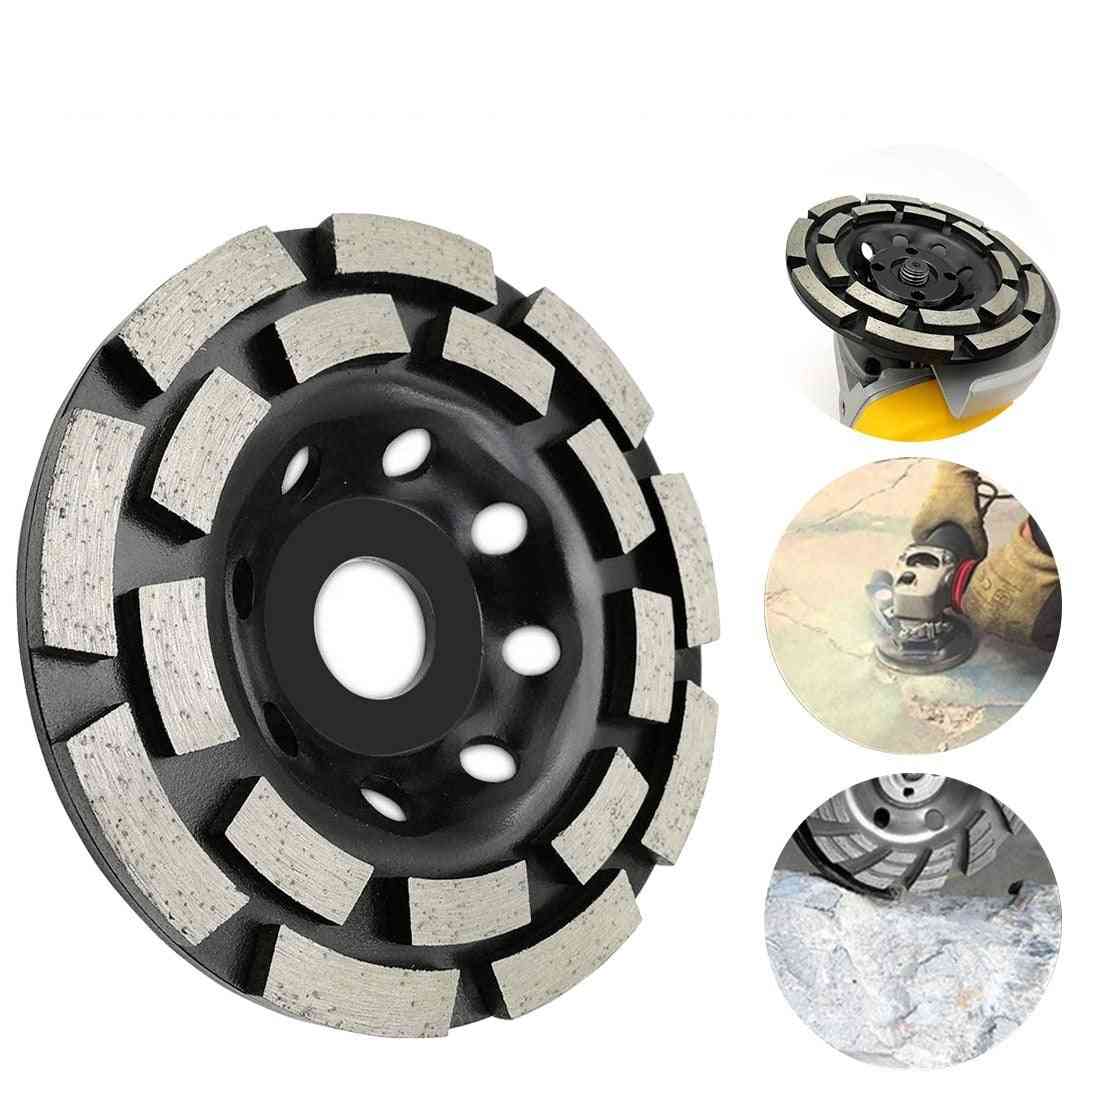 Diamond Grinding Disc Concrete Grinder Wheel Cutting Cup Saw Blade Tool